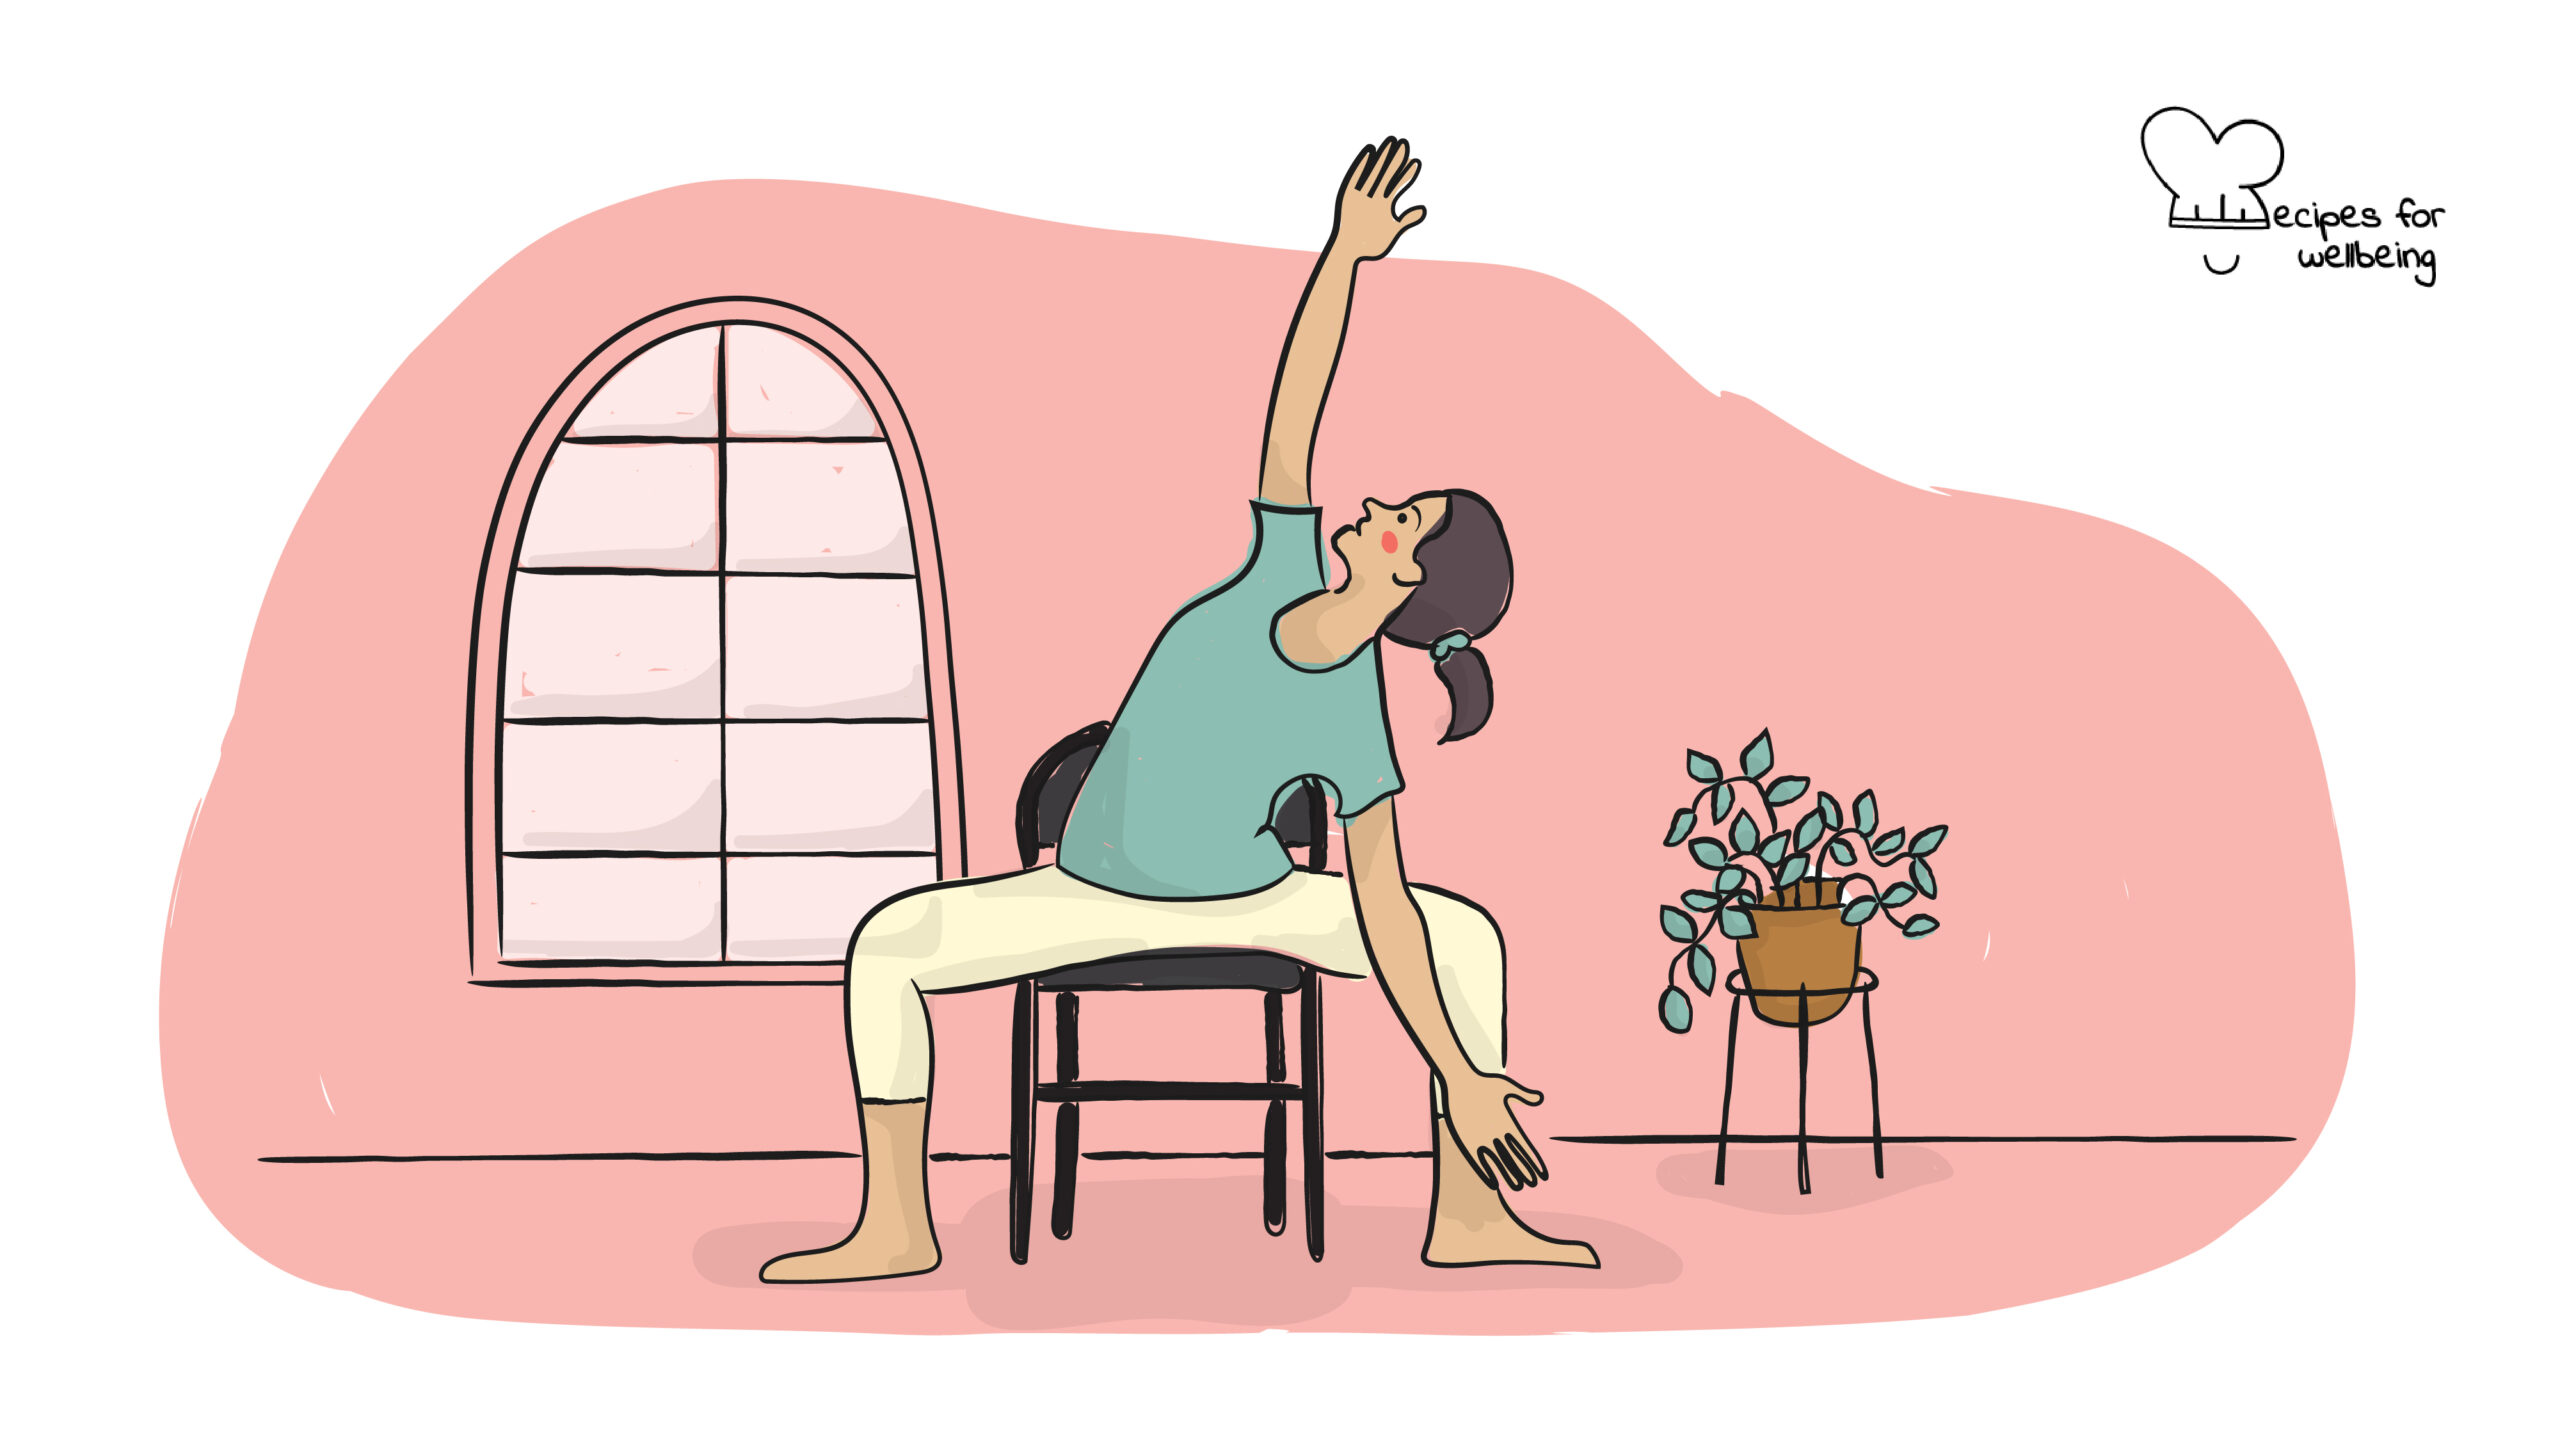 Illustration of a person sitting on a chair in a yoga pose. © Recipes for Wellbeing